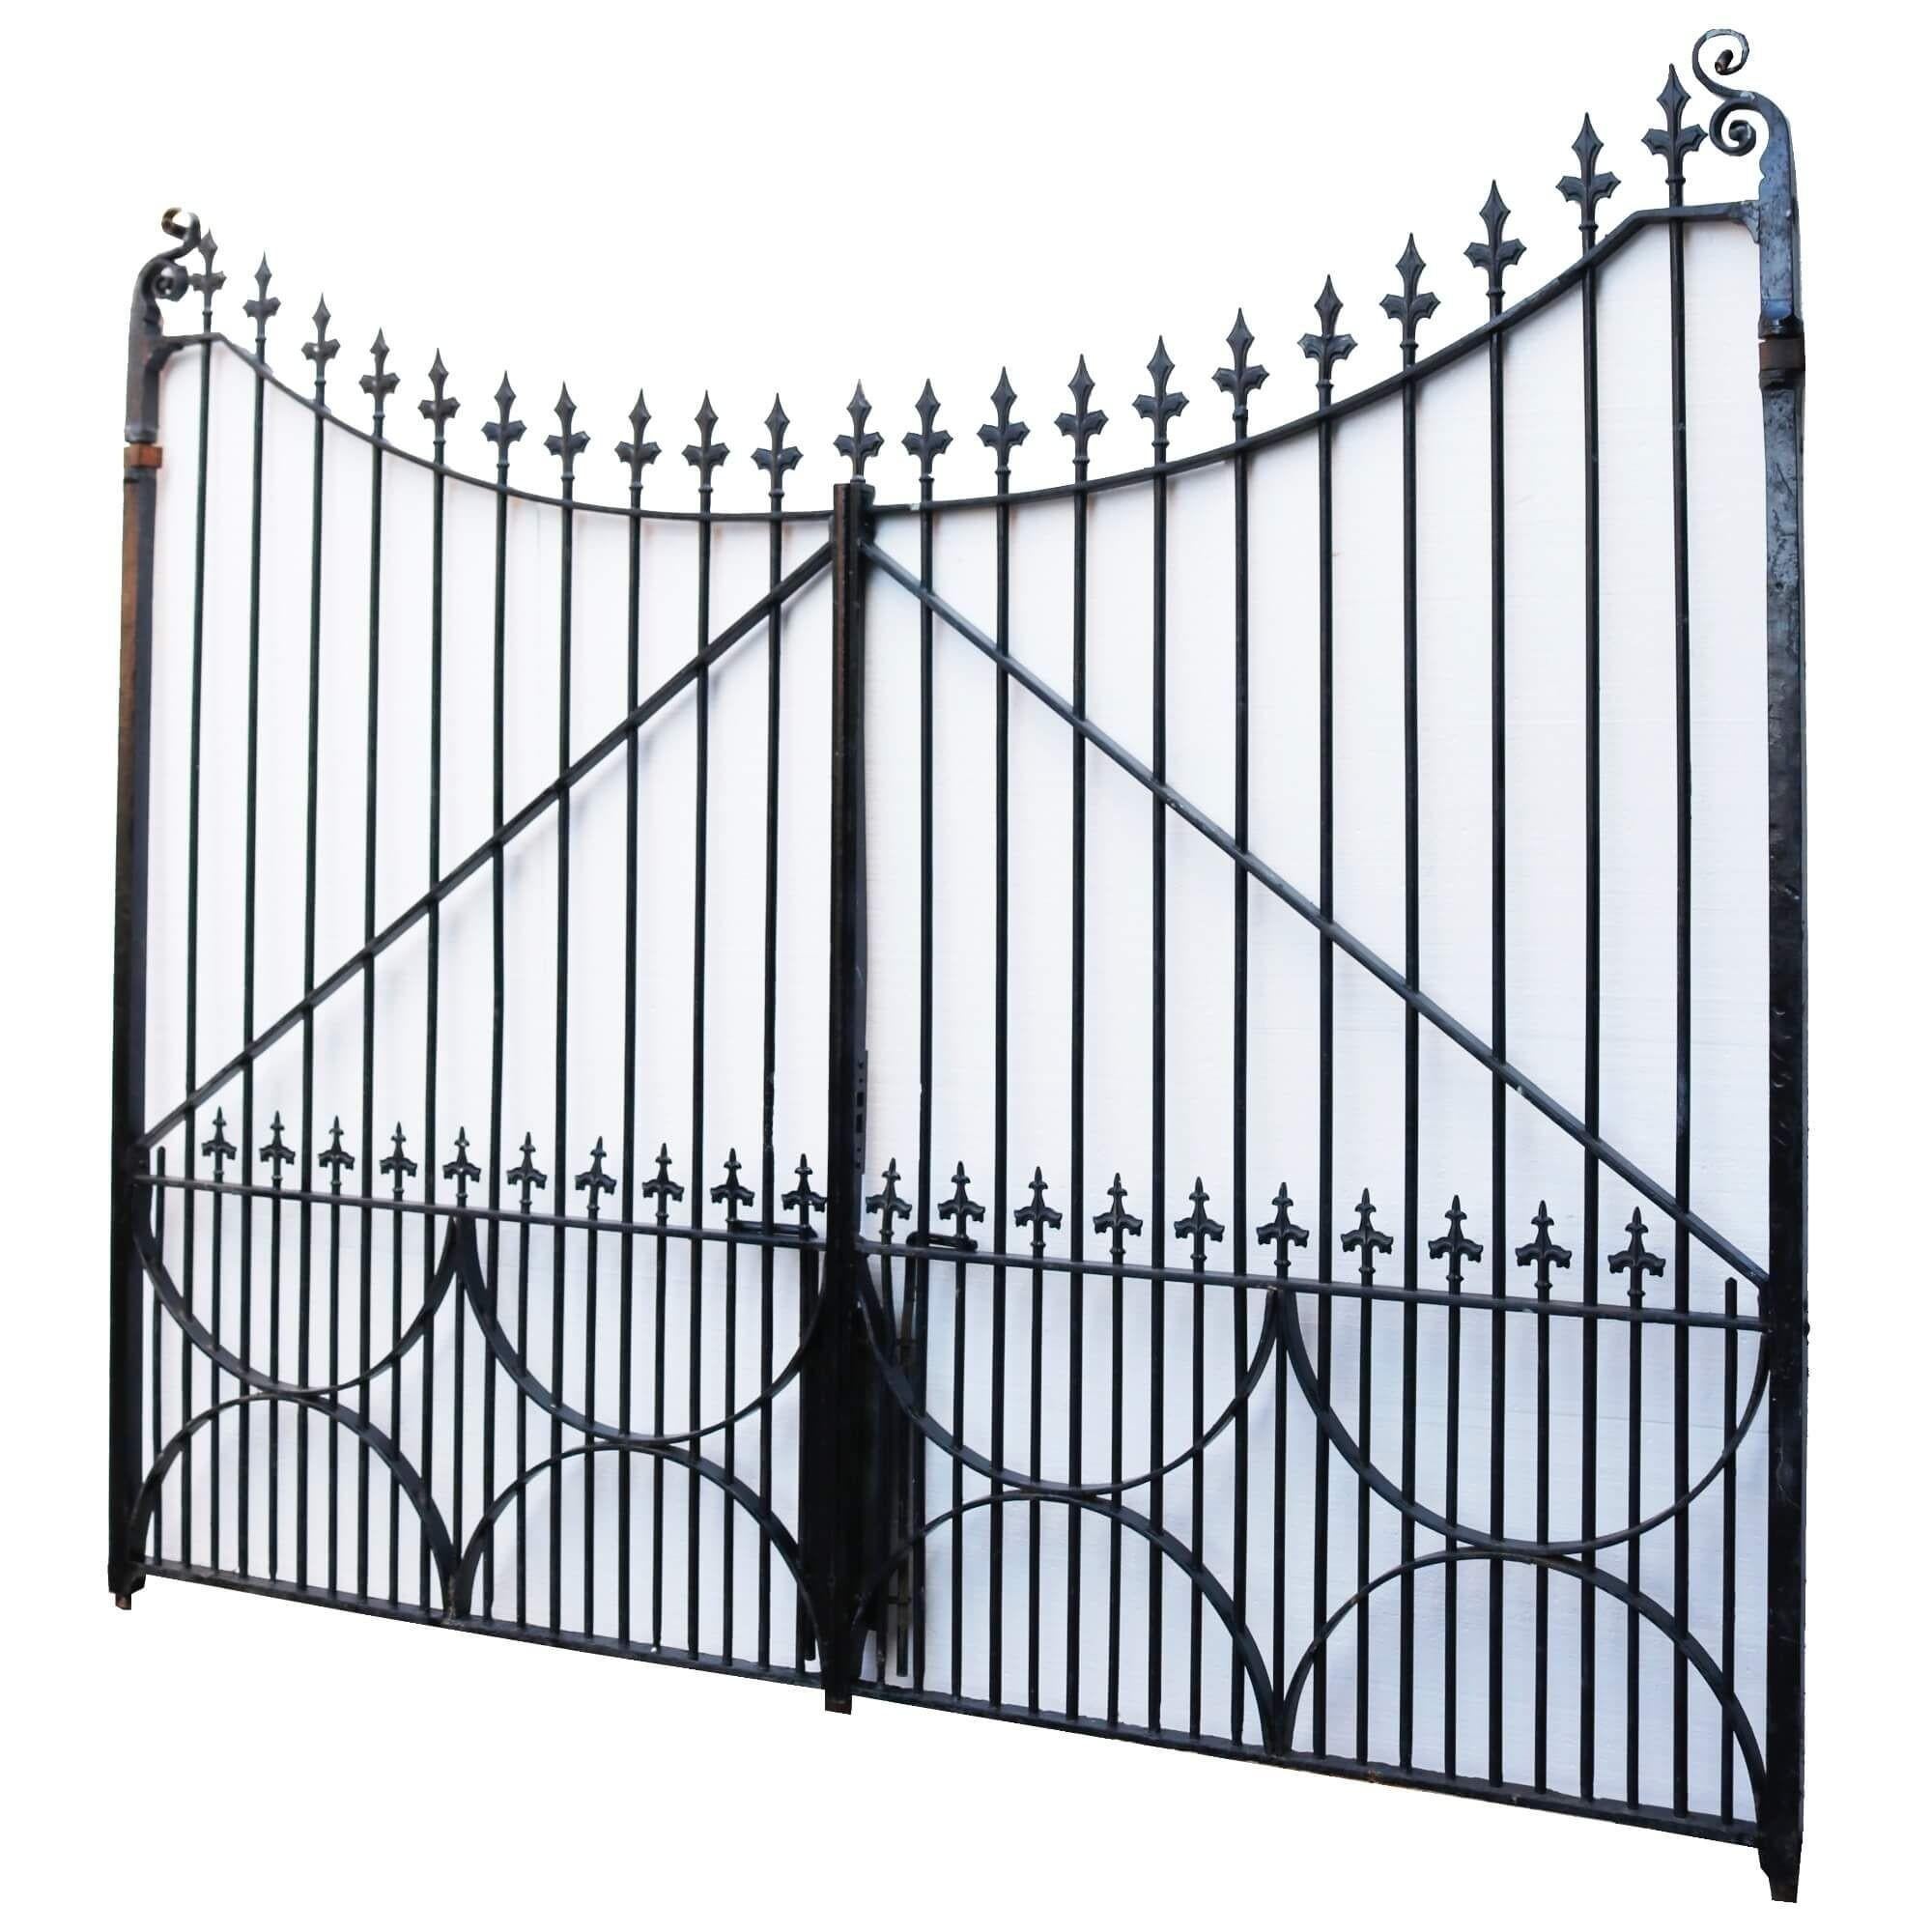 At 244cm tall, these wrought iron driveway gates make a spectacular entrance to a property or garden. Originating from the 1890s, they were made at the hand of a Victorian blacksmith and showcase a splendour of craftsmanship and historical design.